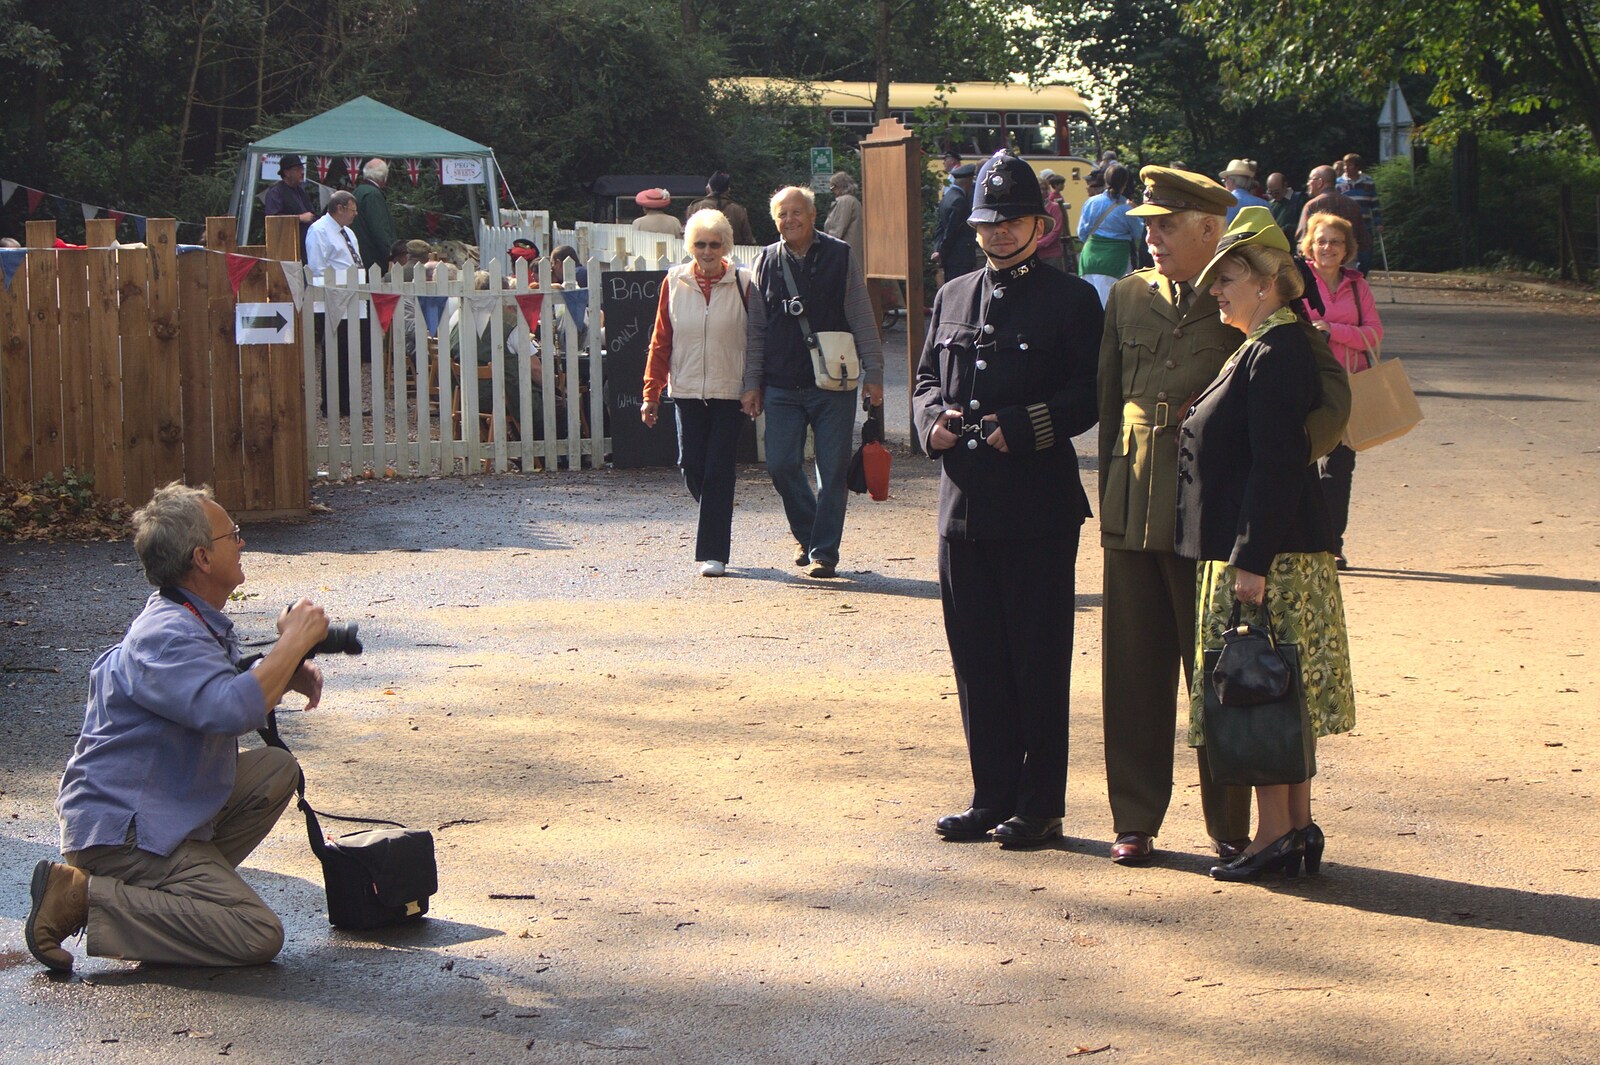 A photographer gets a shot of the 1940s 'Old Bill' from The 1940s Steam Train Weekend, Holt, Norfolk - 18th September 2011